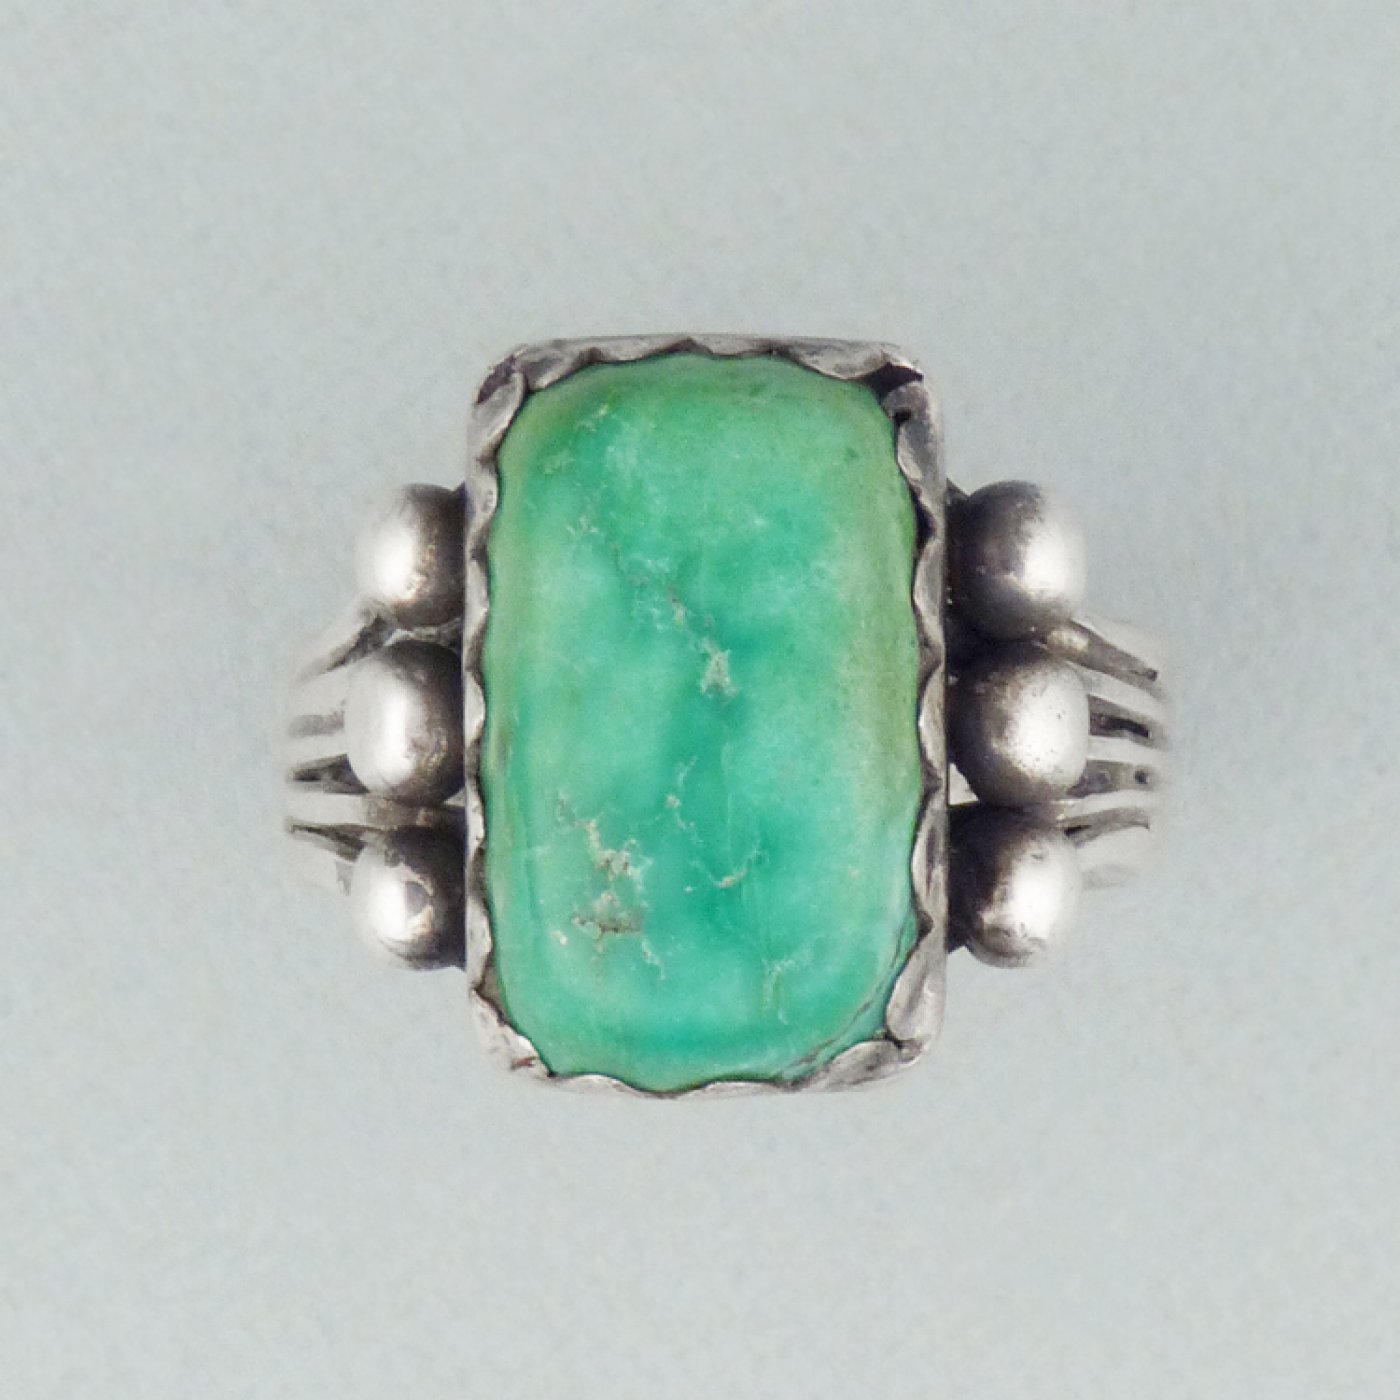 Silver Ring with Square Turquoise Stone, c.1920 | Shiprock Santa Fe